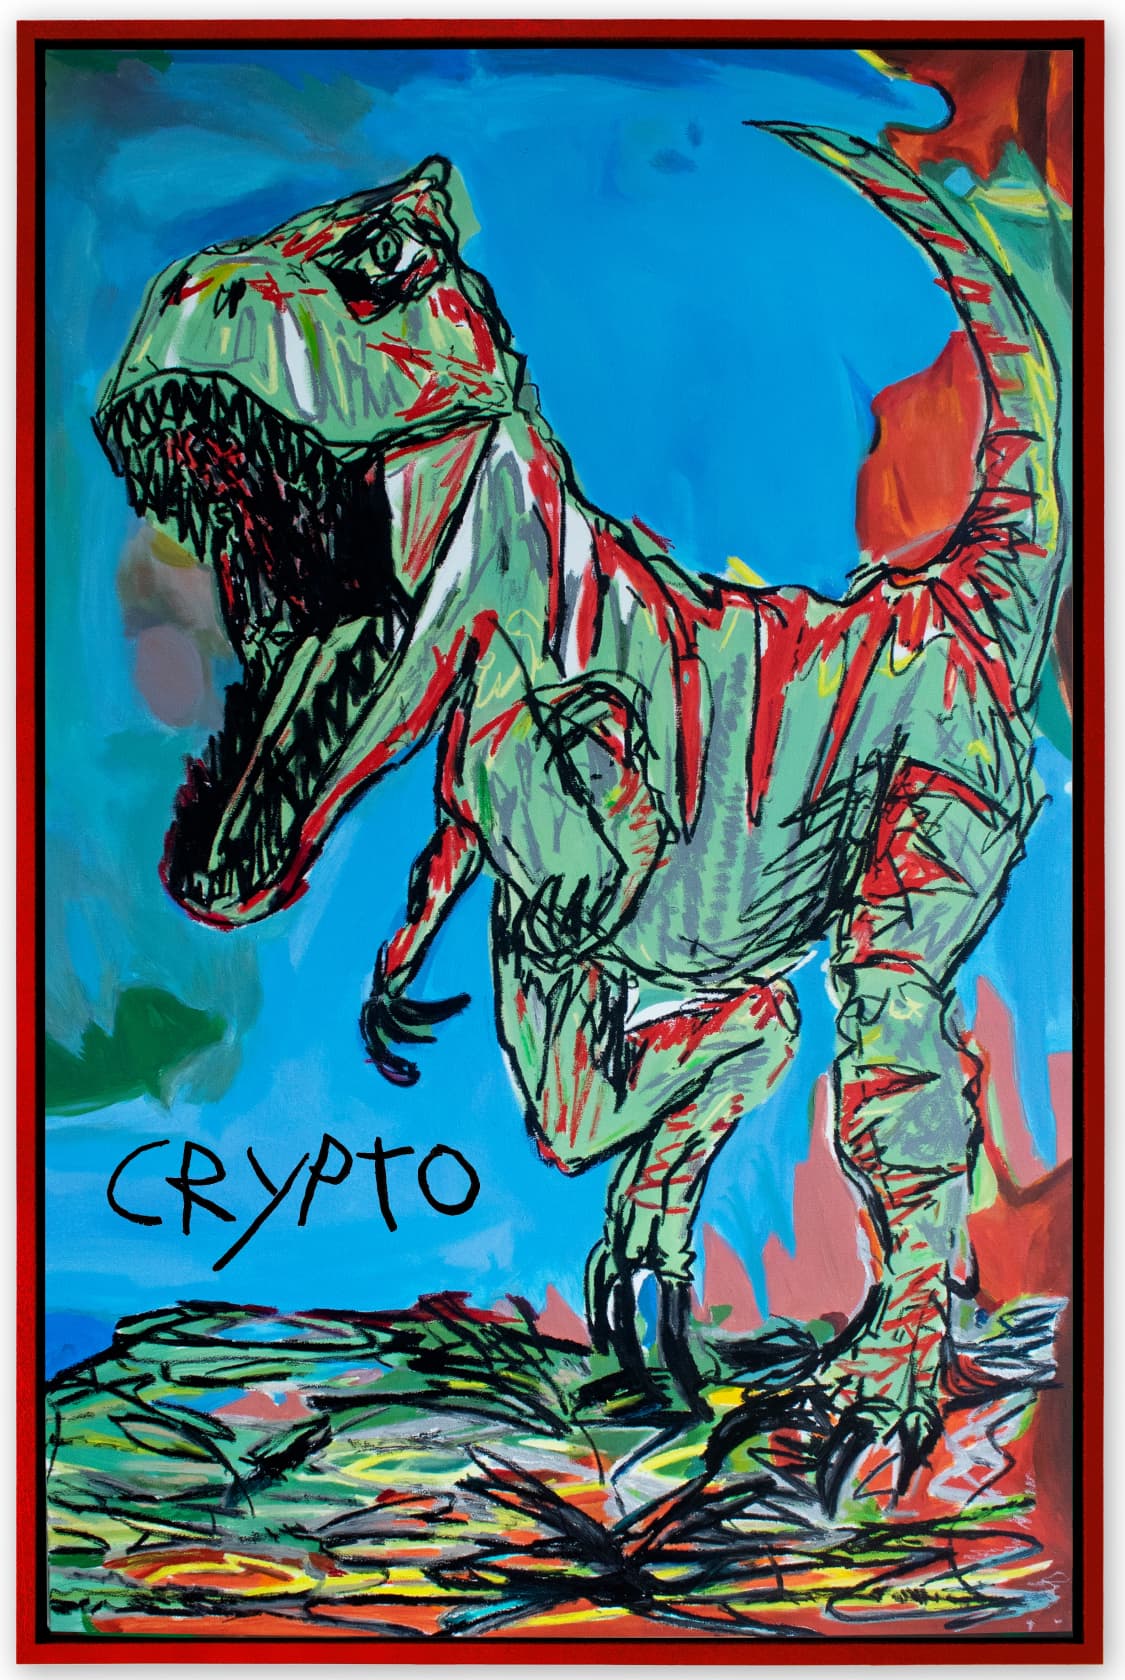 The Connor Brothers Crypto Acrylic and oil stick on canvas